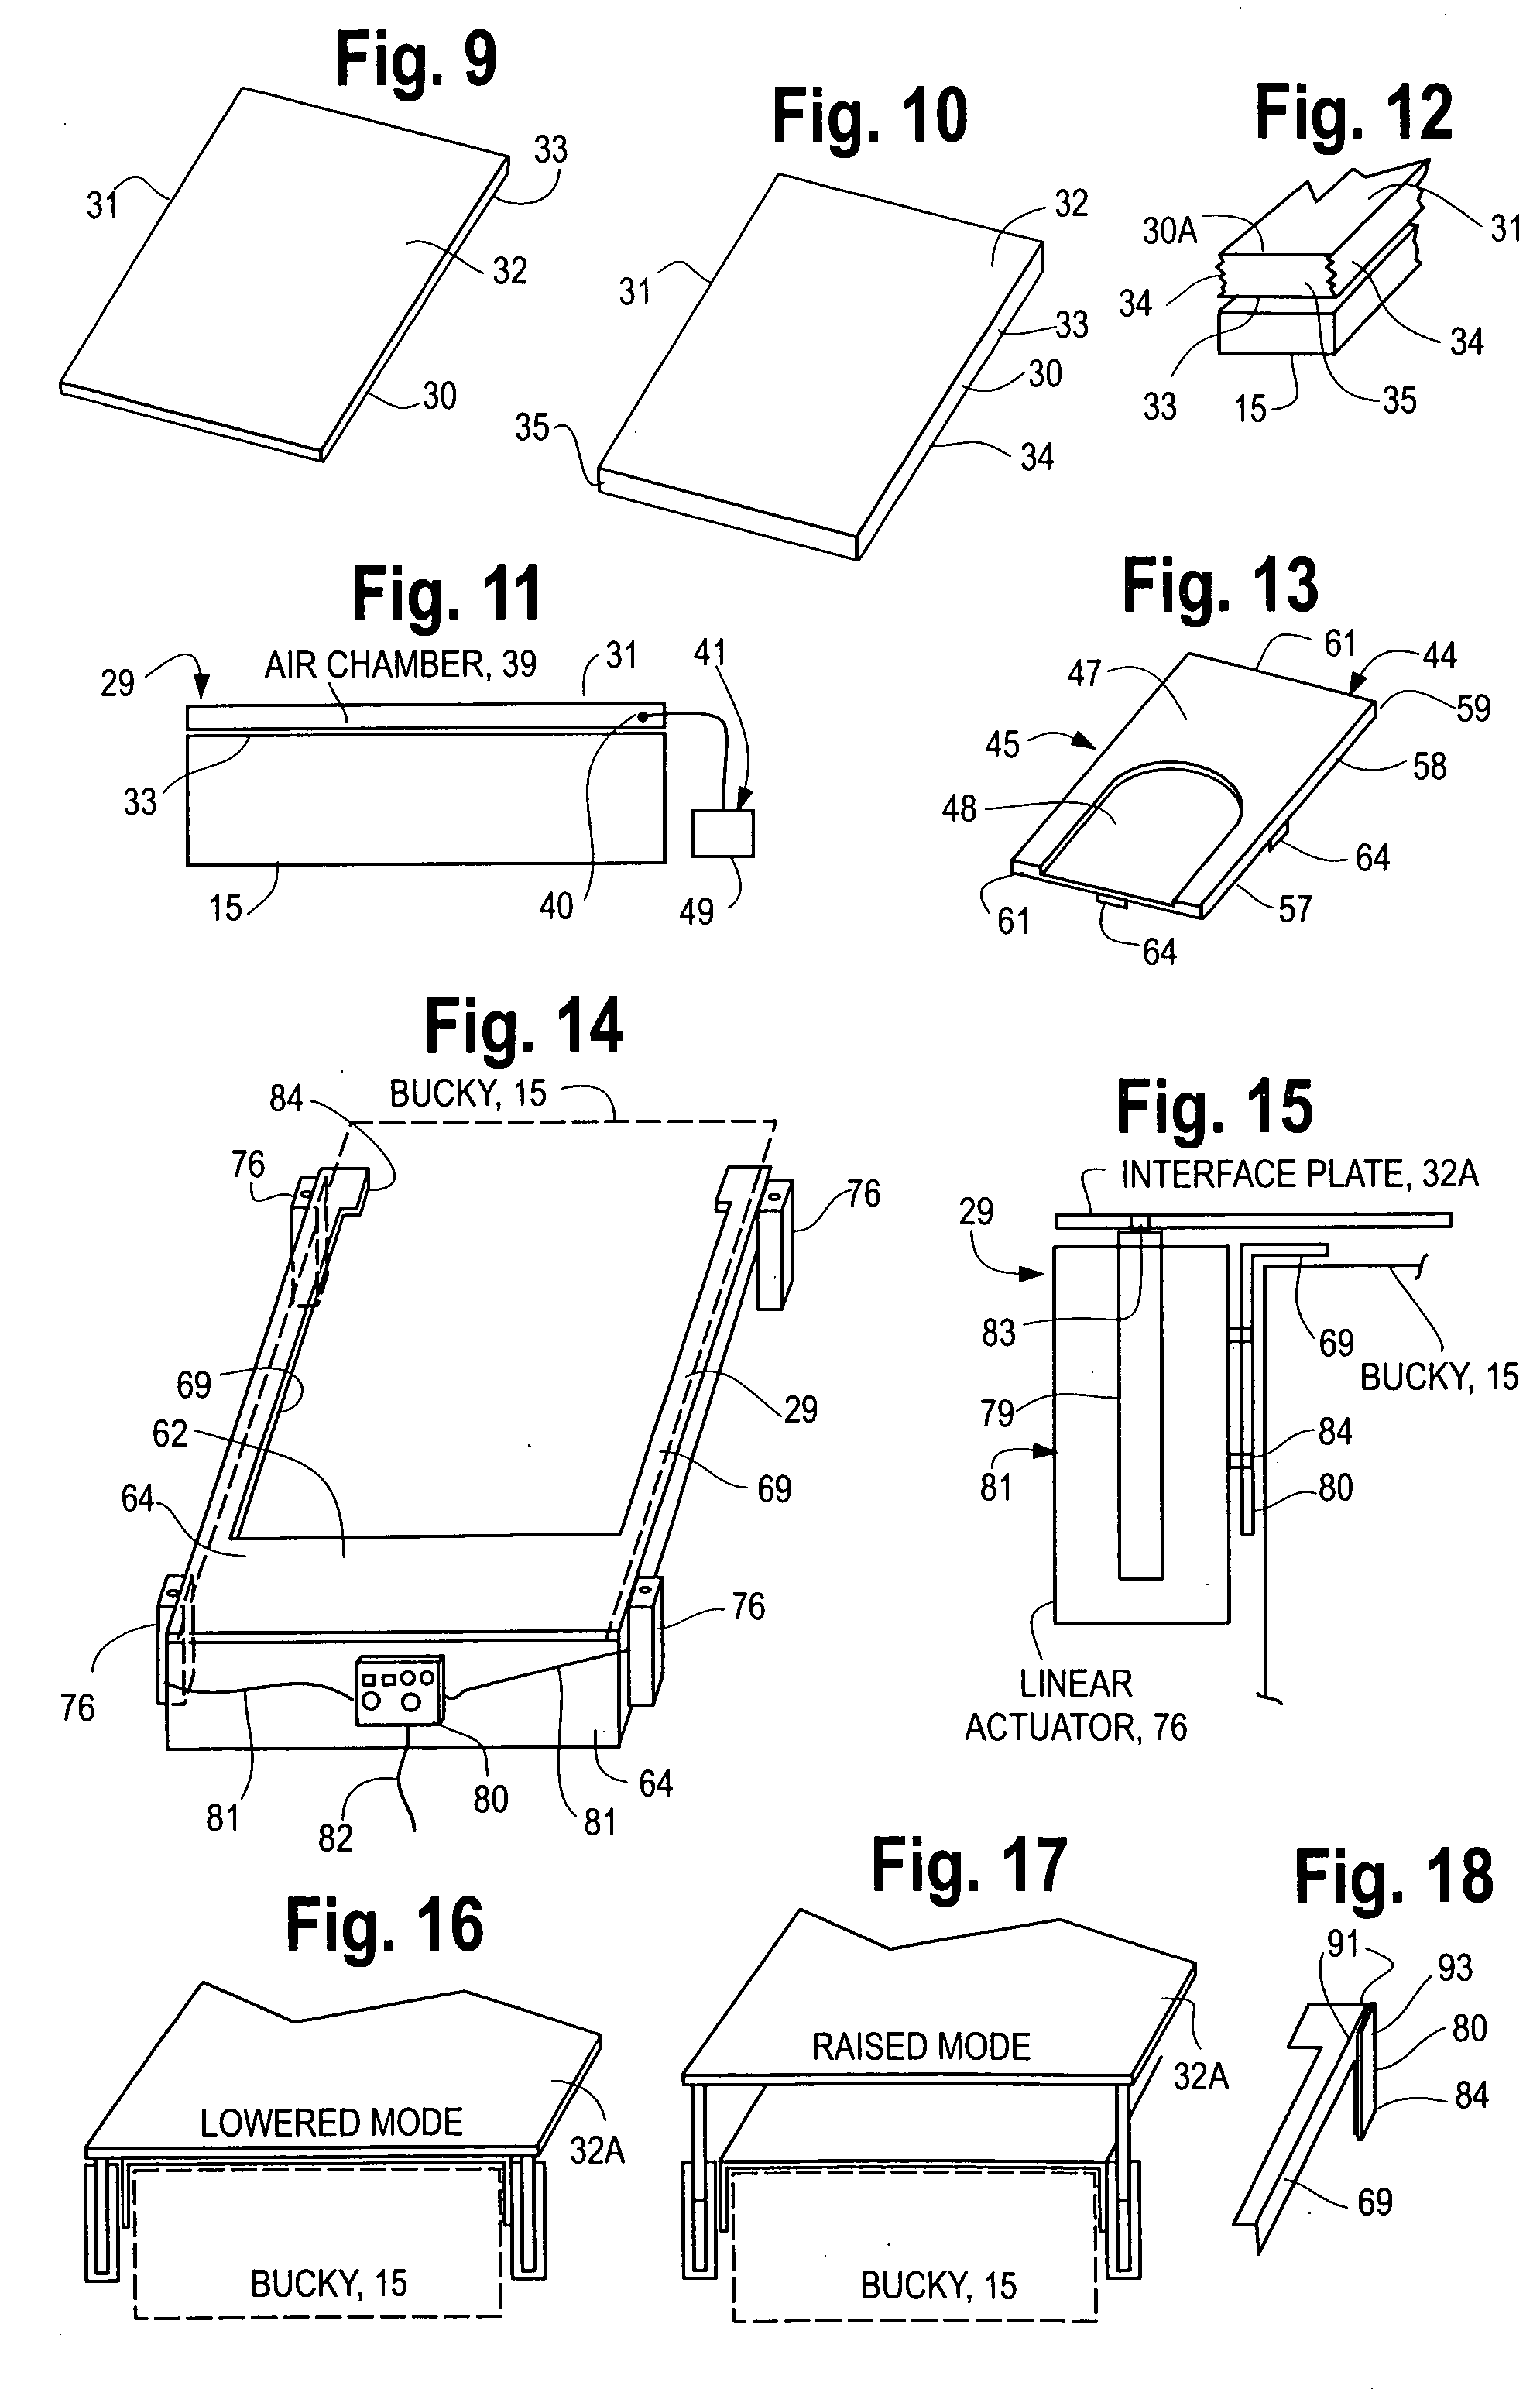 Mammography procedure and apparatus for reducing pain when compressing a breast